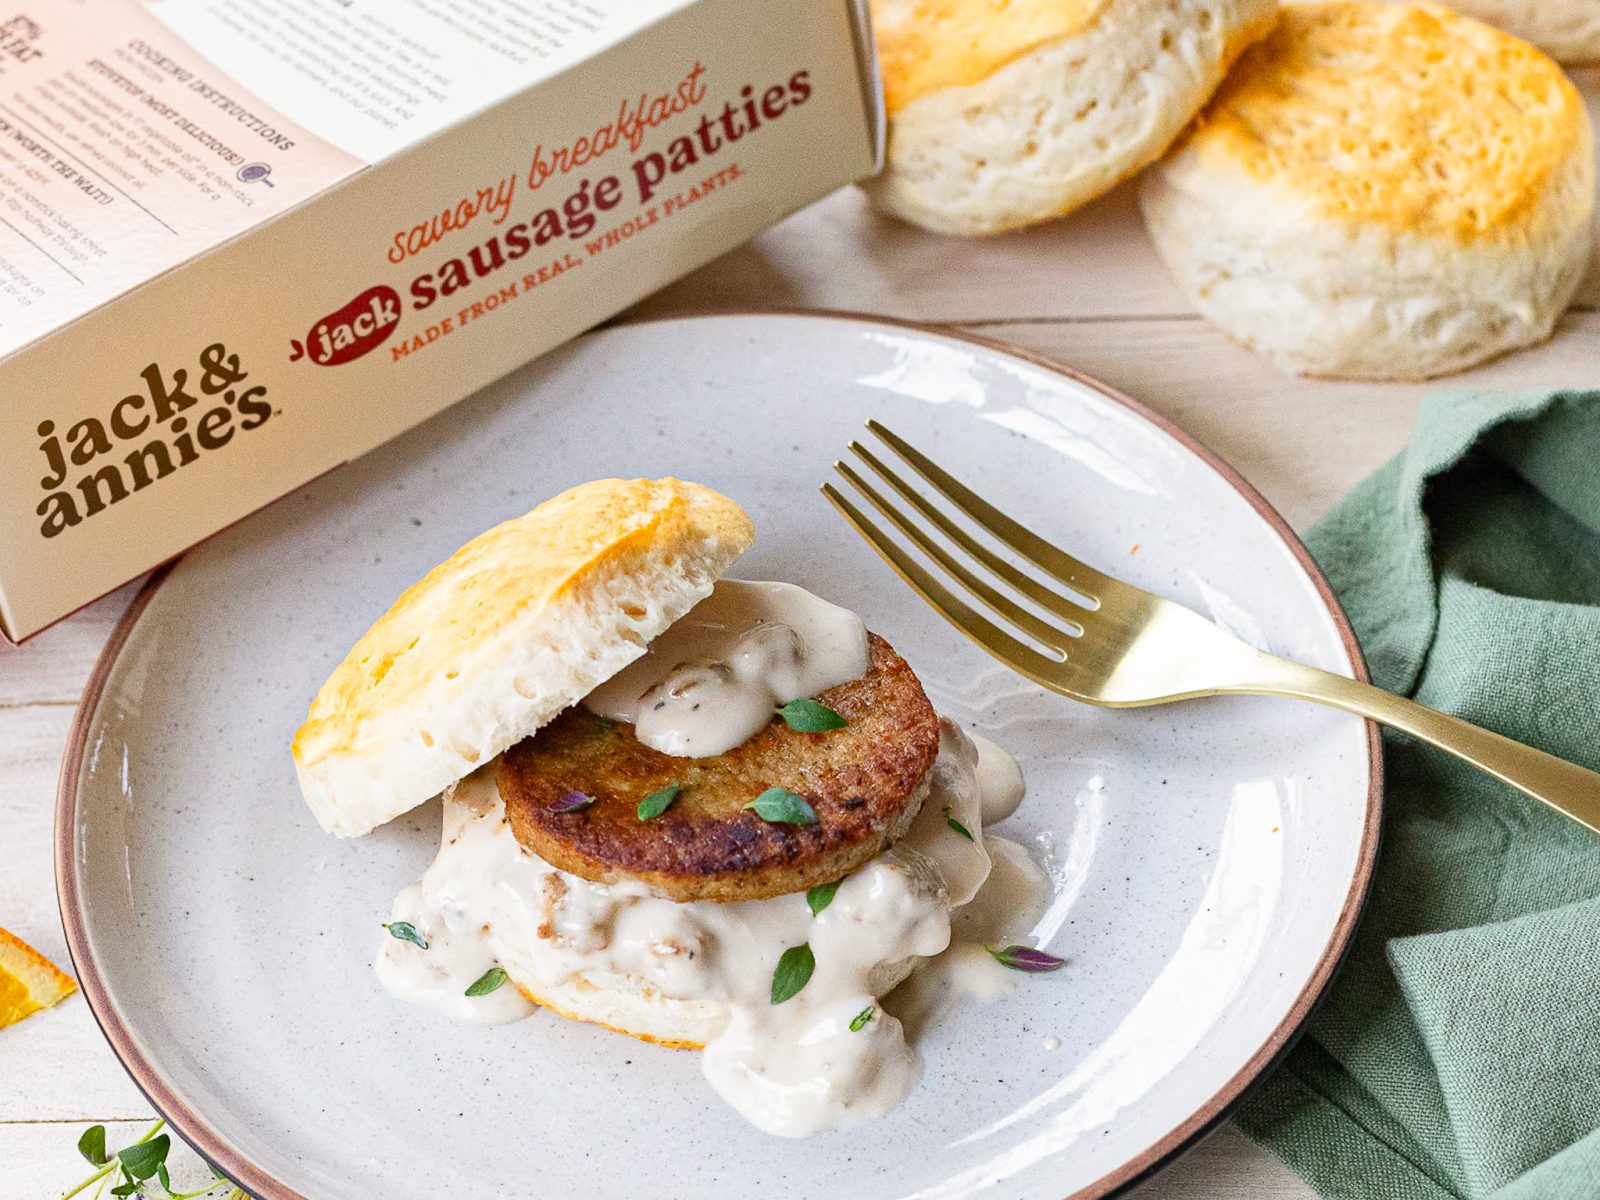 Jack & Annie’s Plant-Based Meat Products Are On Sale NOW At Publix –  Grab A Deal And Whip Up Some Biscuits And Jack Sausage Gravy